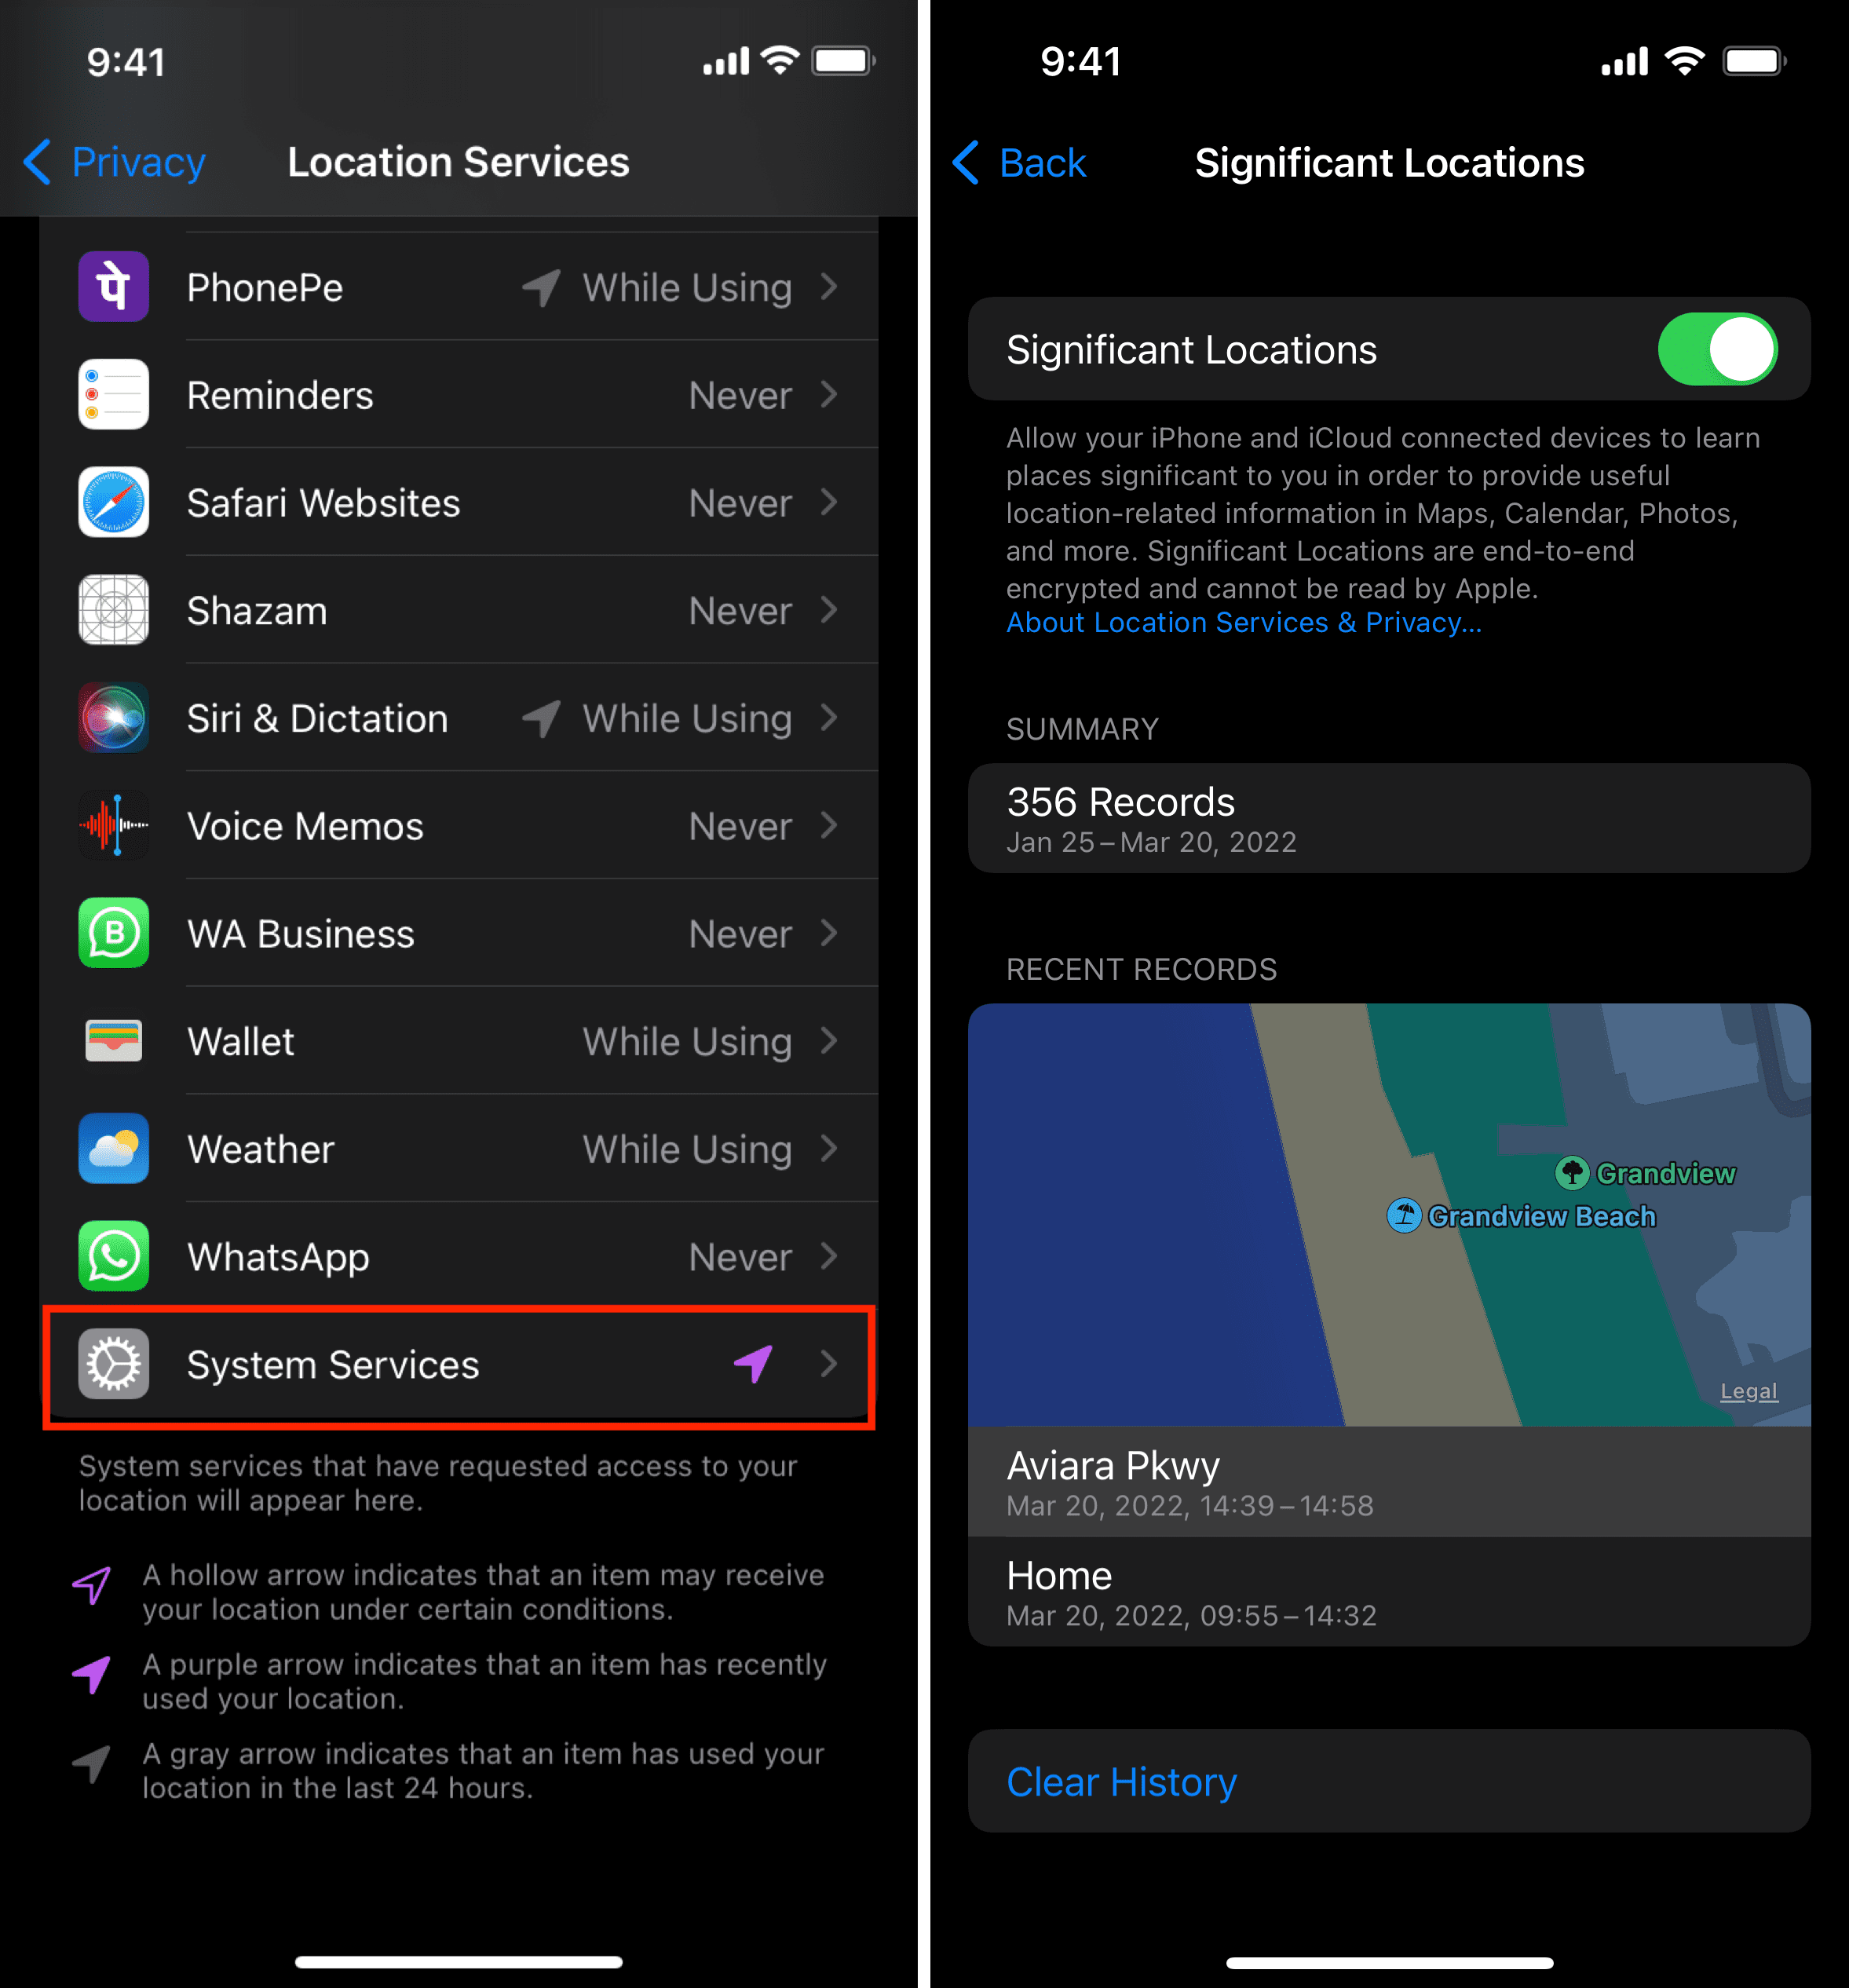 Significant Locations on iPhone to see your location history